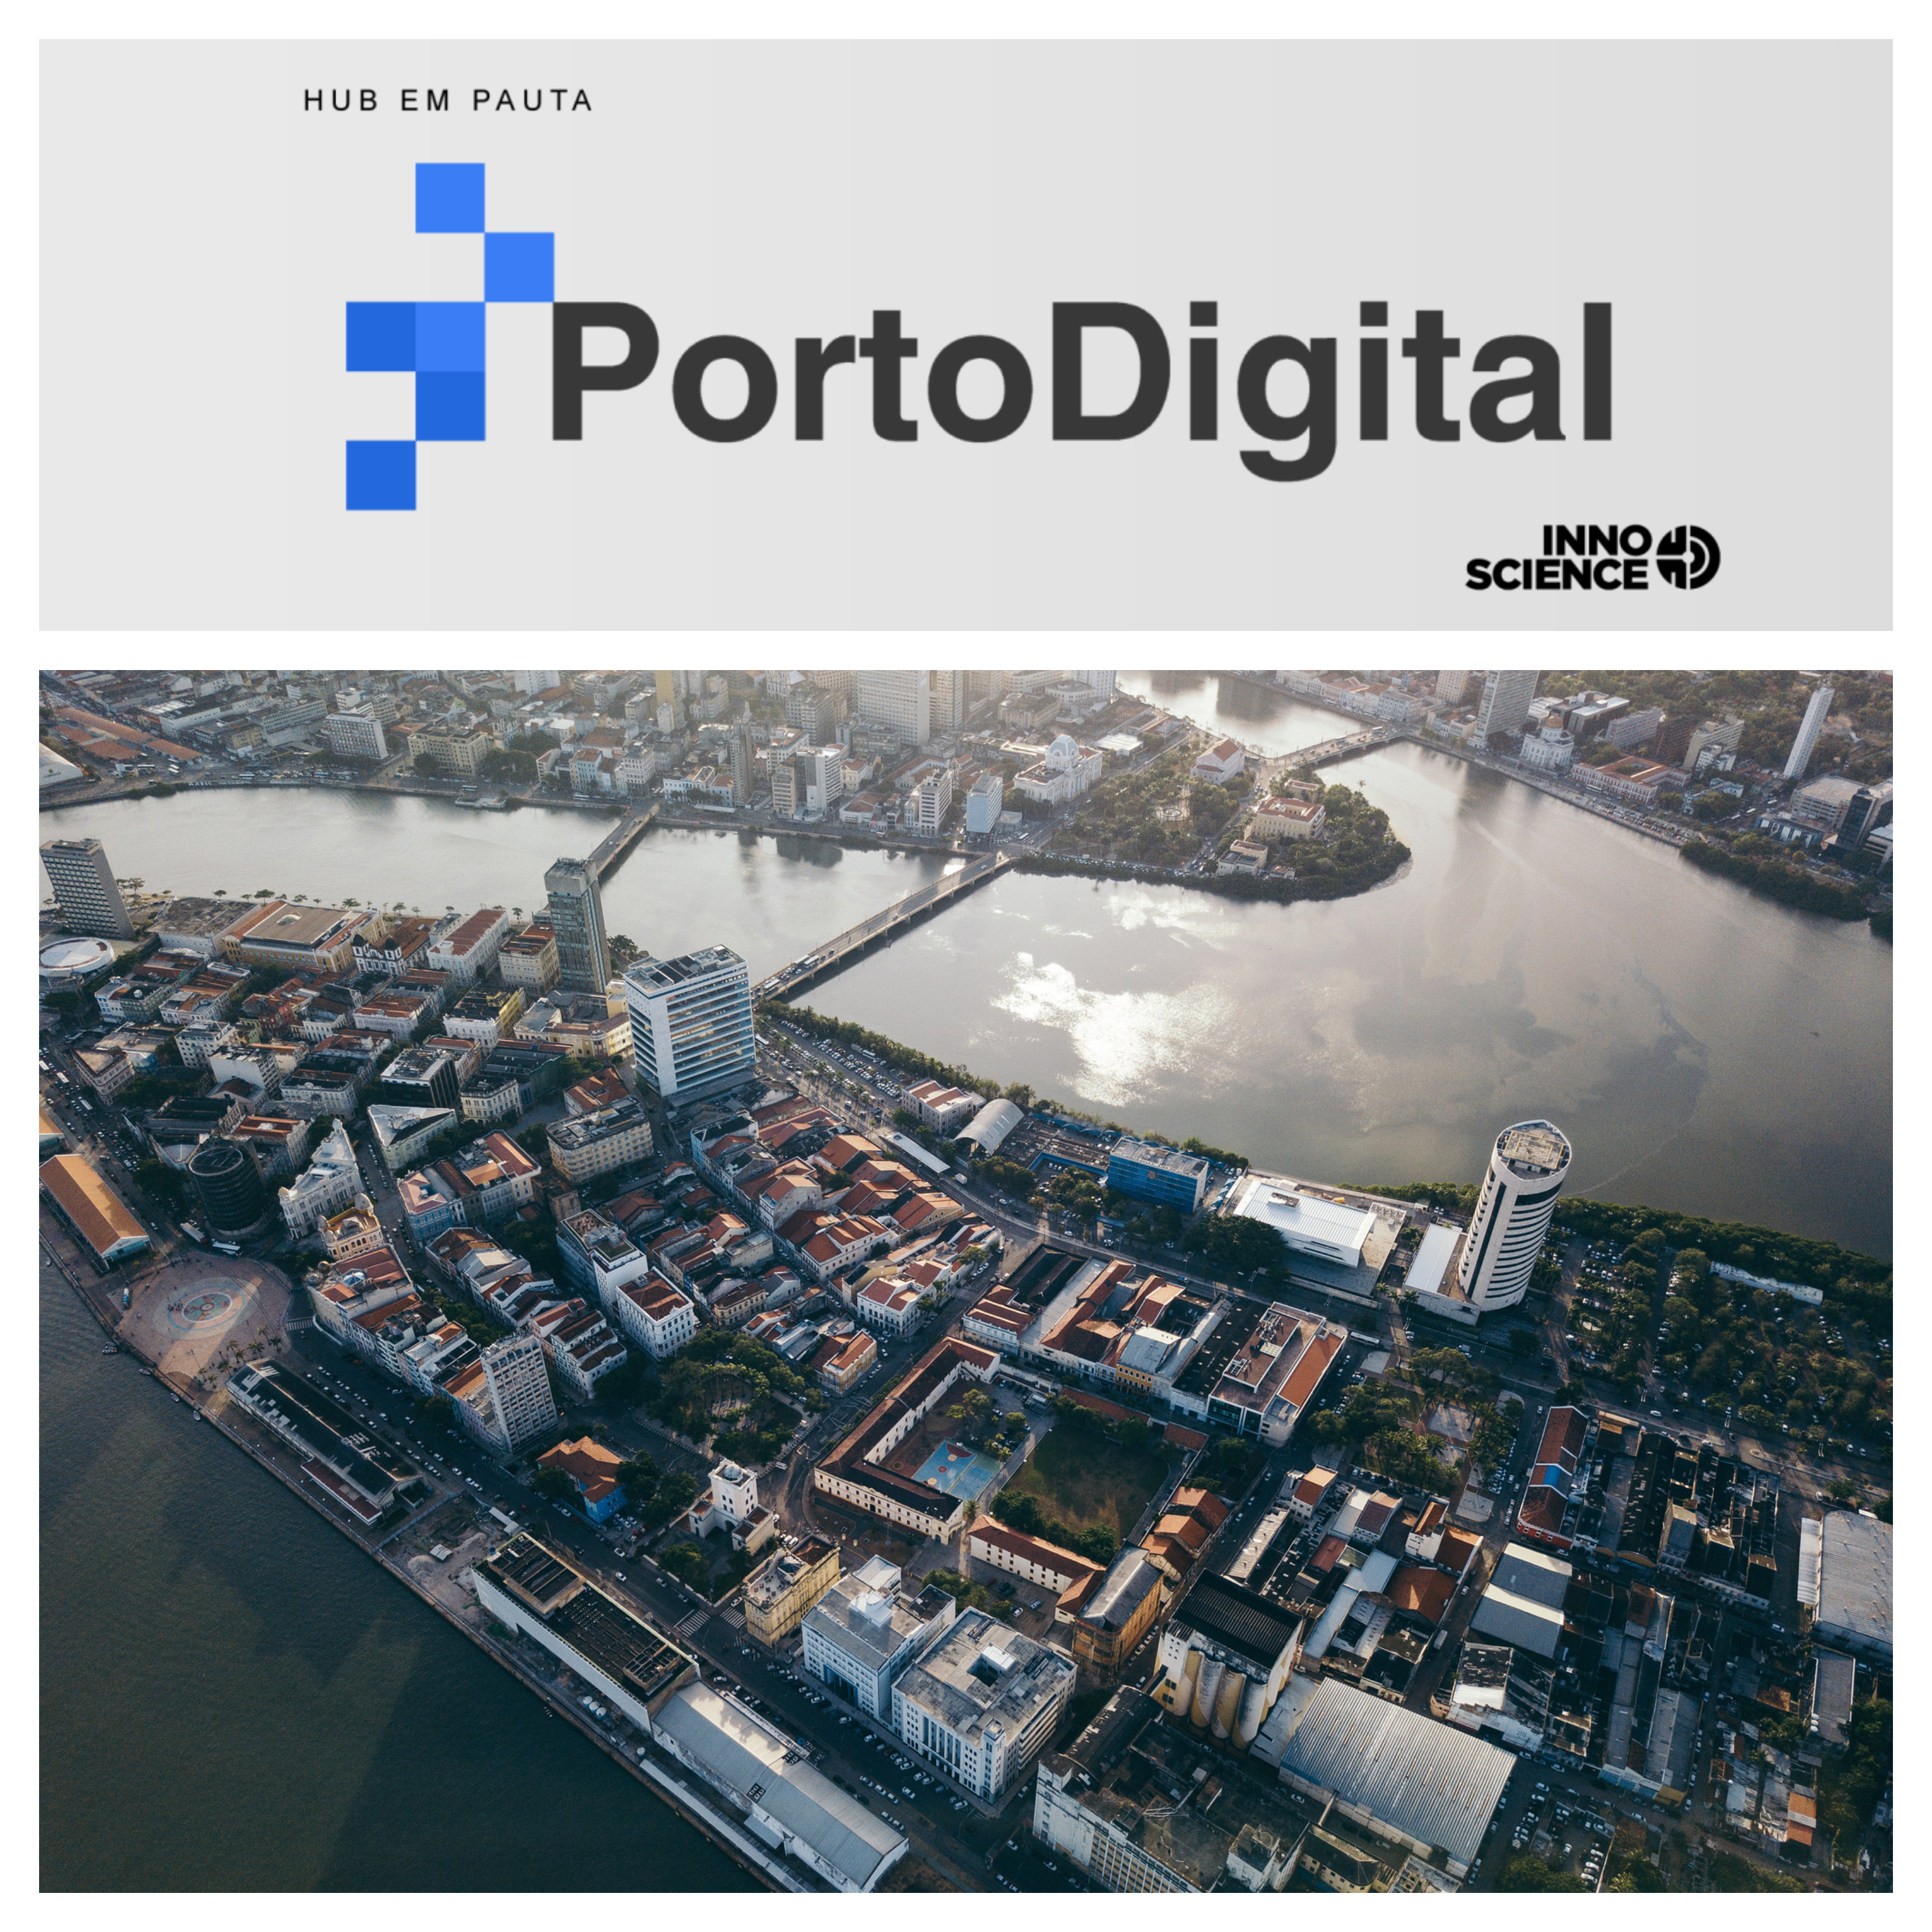 Porto Digital: How a Brazilian Technological Park is Fostering Innovation through the Triple Helix Model